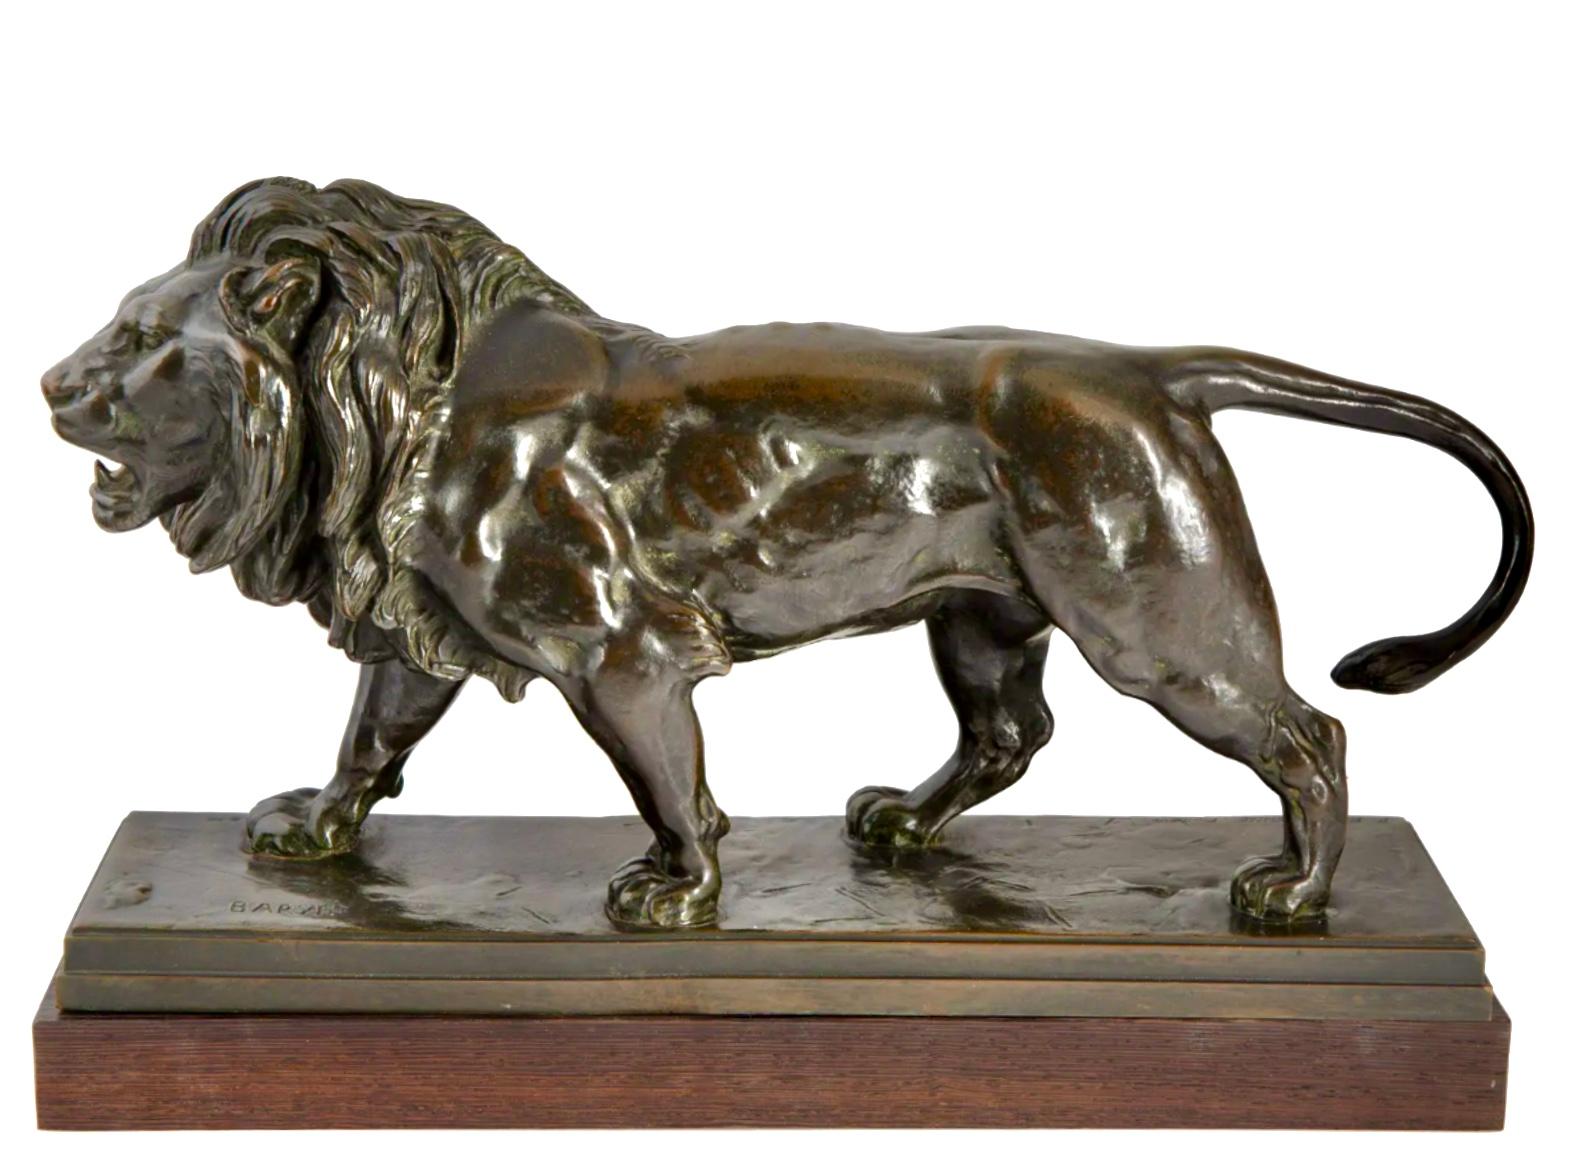 ANTOINE LOUIS BARYE (FRENCH 1795-1875)
Lion Qui Marche; The Walking Lion is an iconic Barye bronze depicting the fierce and elegant Lion Barye studied in the Paris zoo in the early nineteenth century and one of a pair with the Tigre Qui Marche which